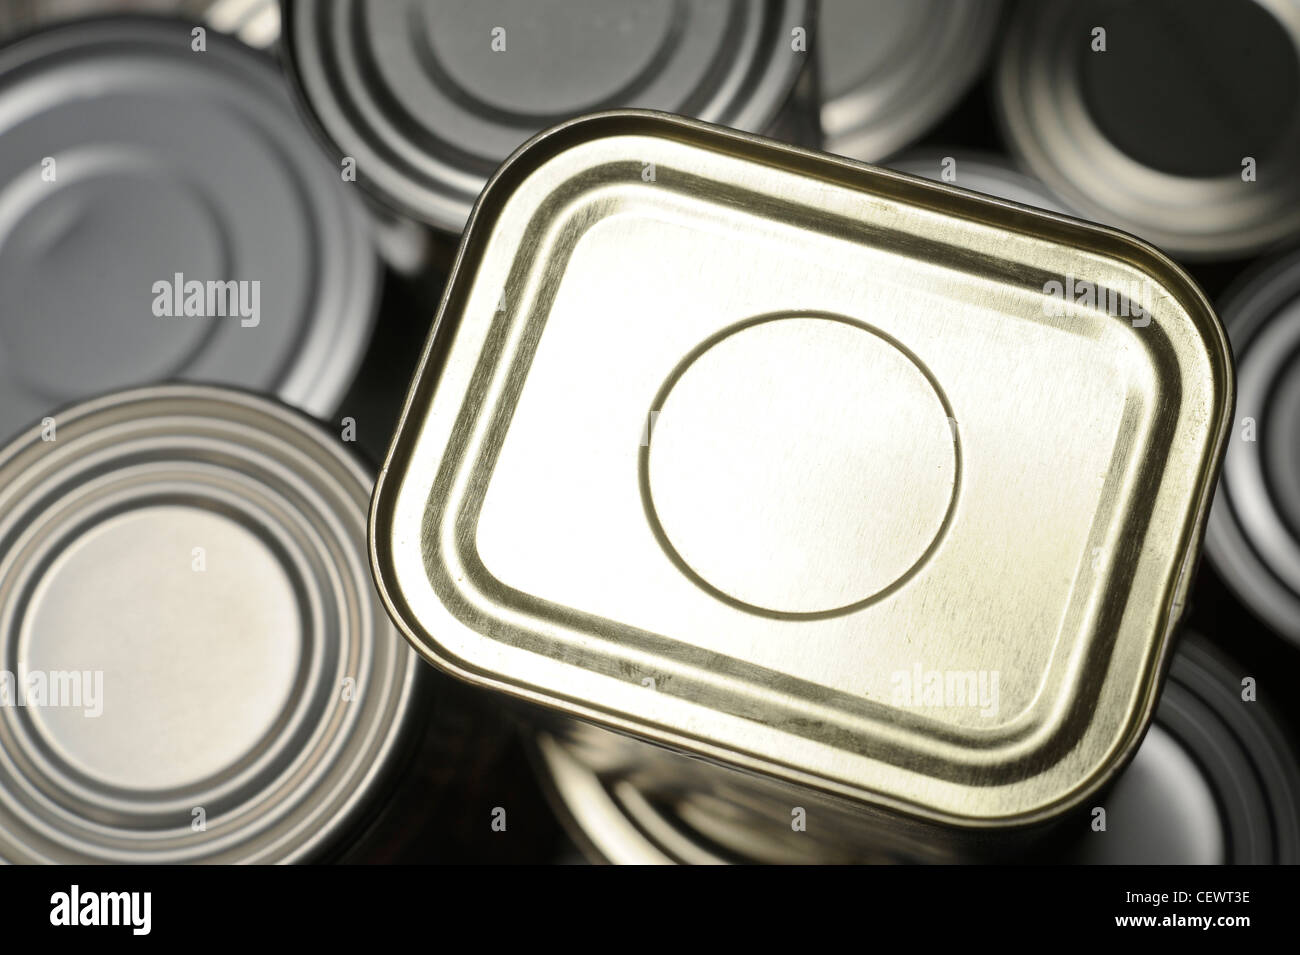 Years Of The Tin Can A still life image of a group of tinned food products Stock Photo